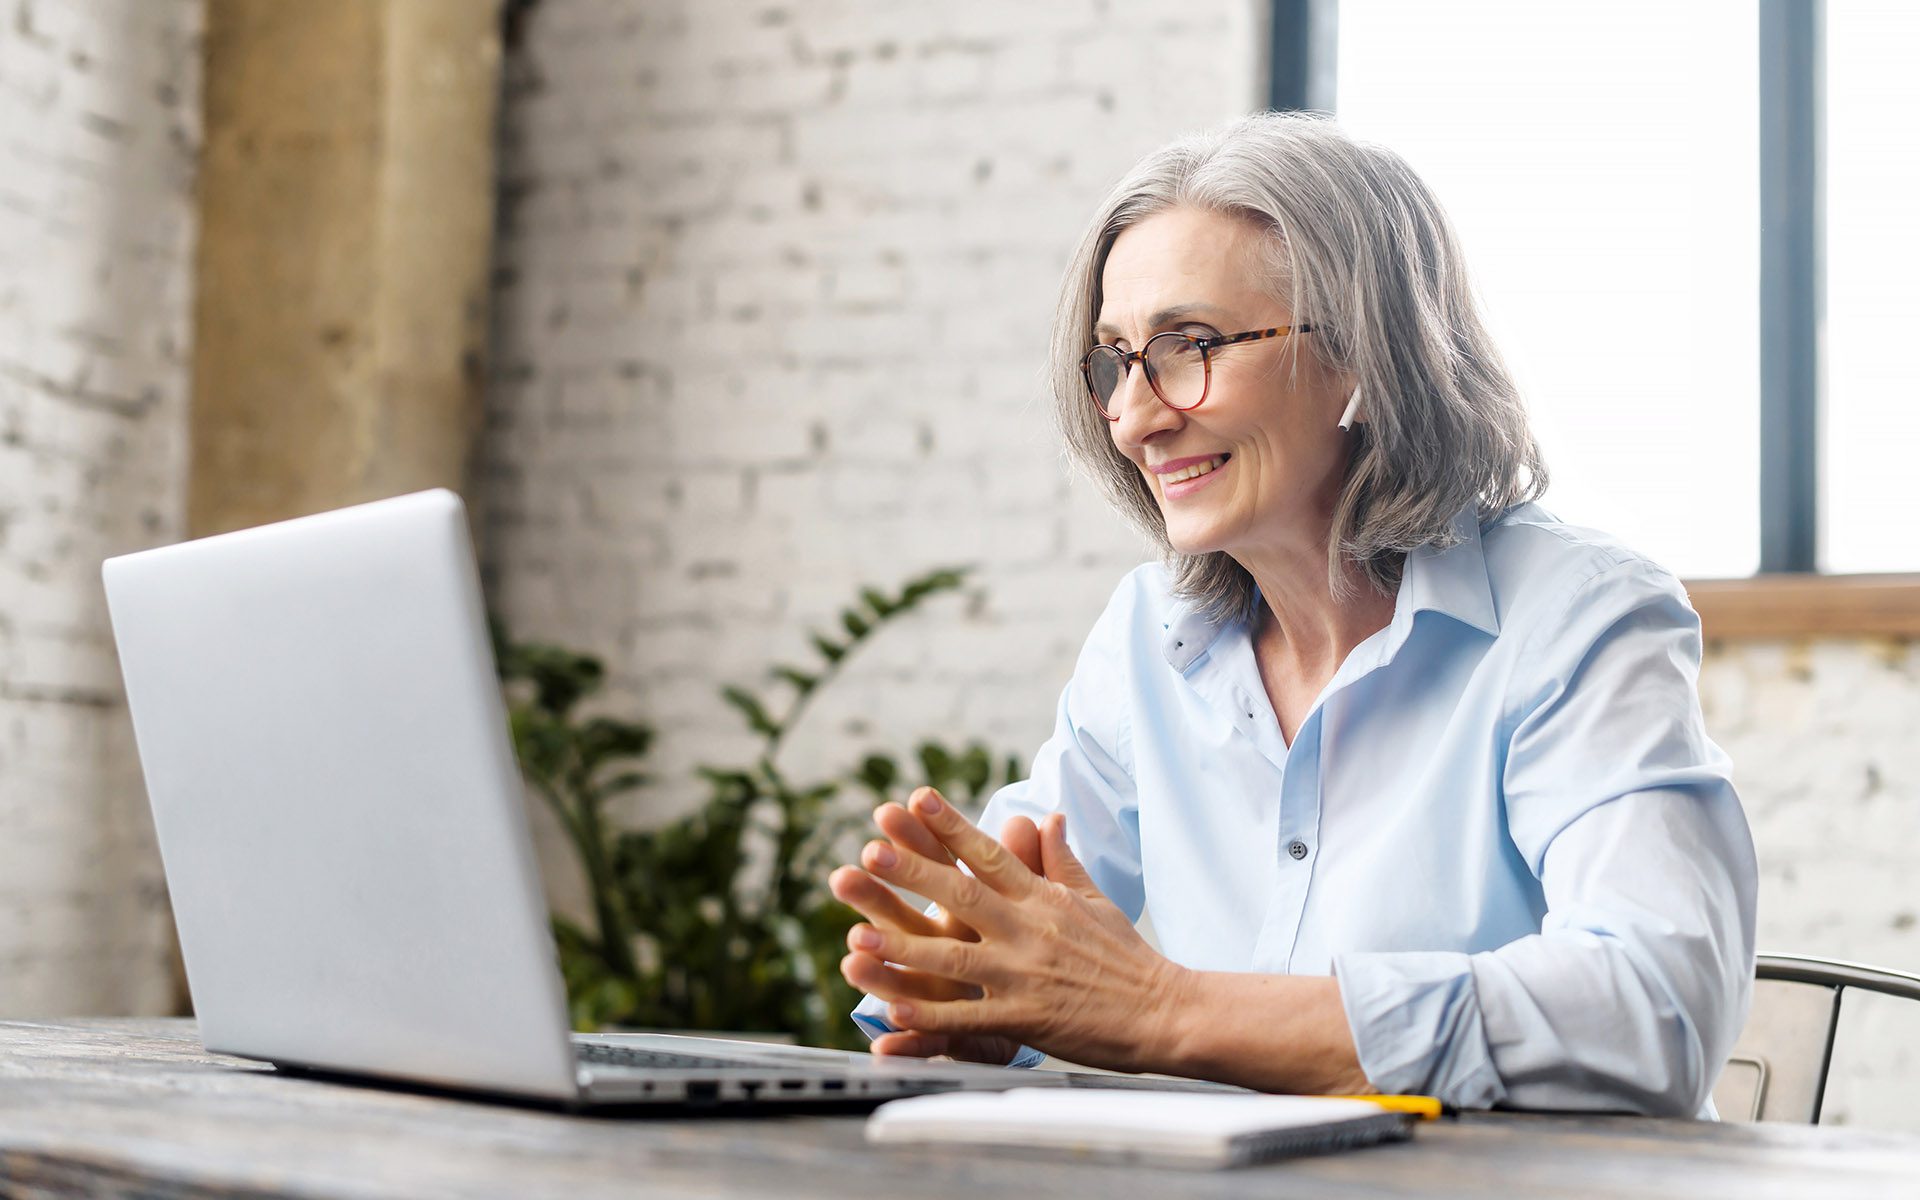 Landing Page #3 - Older Professional Using a Laptop to Run a Meeting